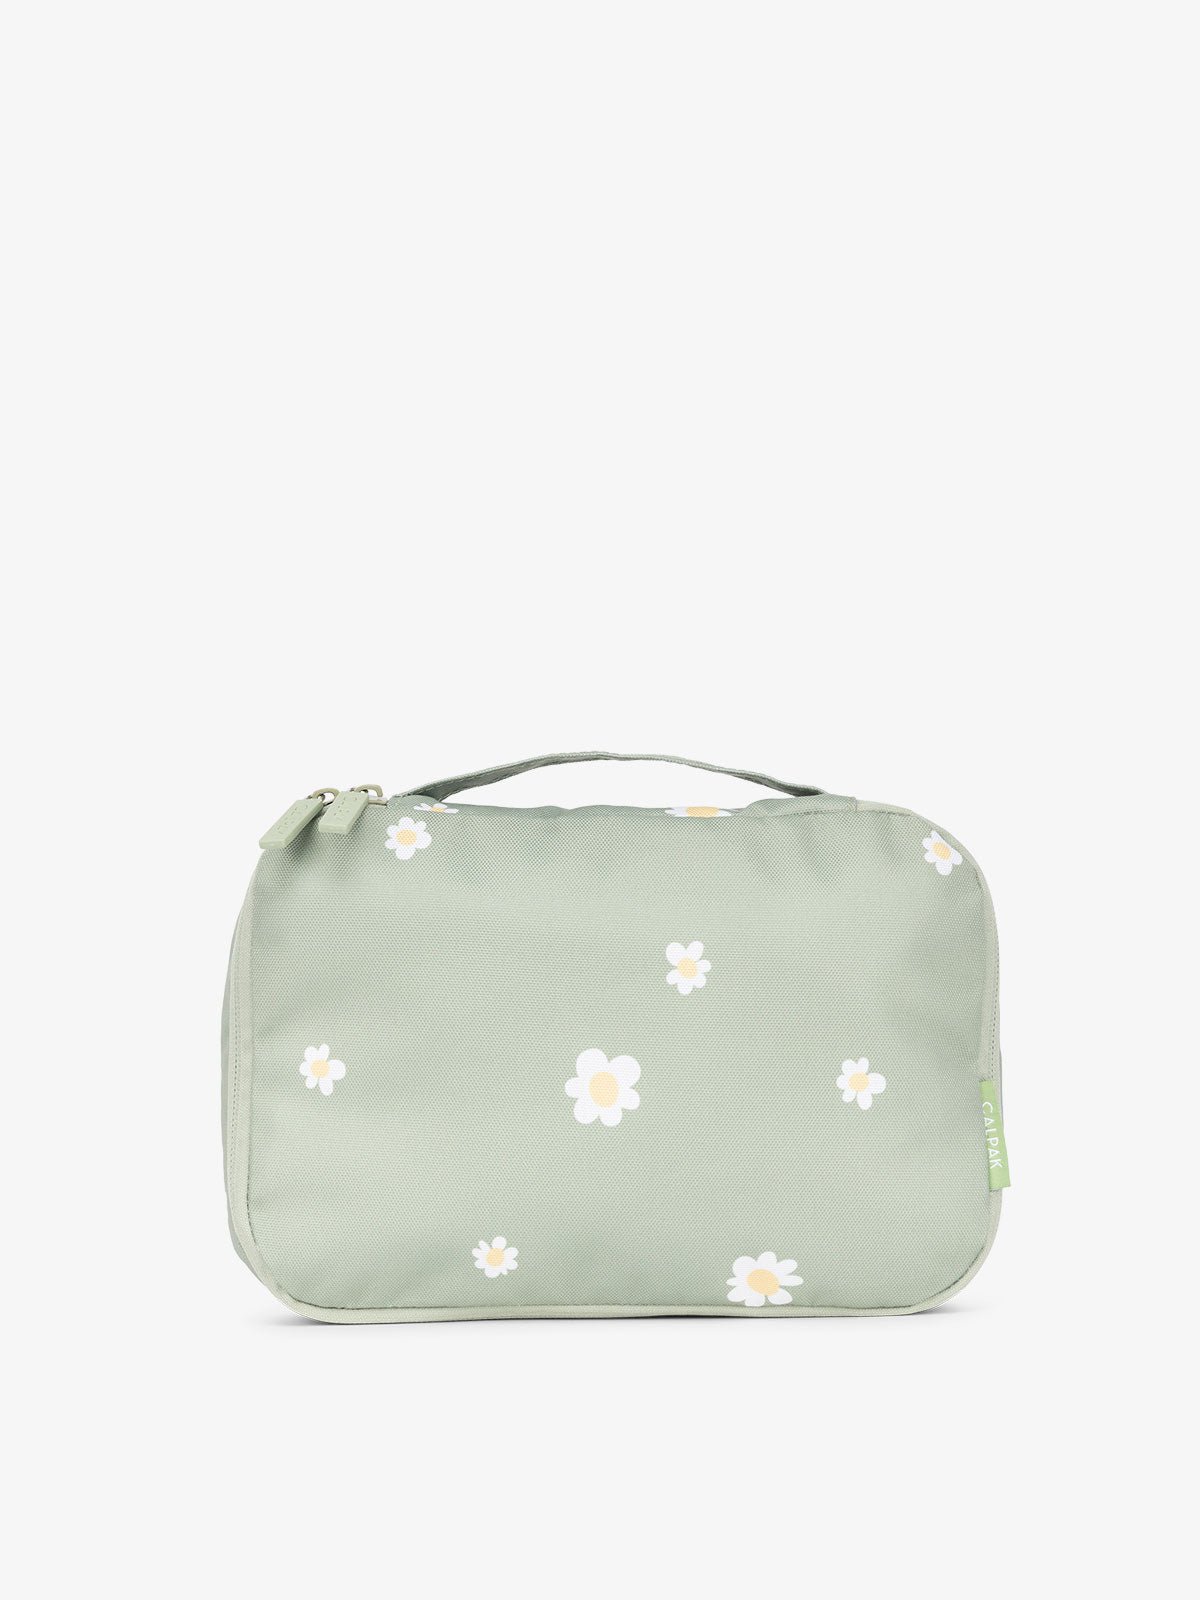 CALPAK small packing cubes with top handle in green floral print